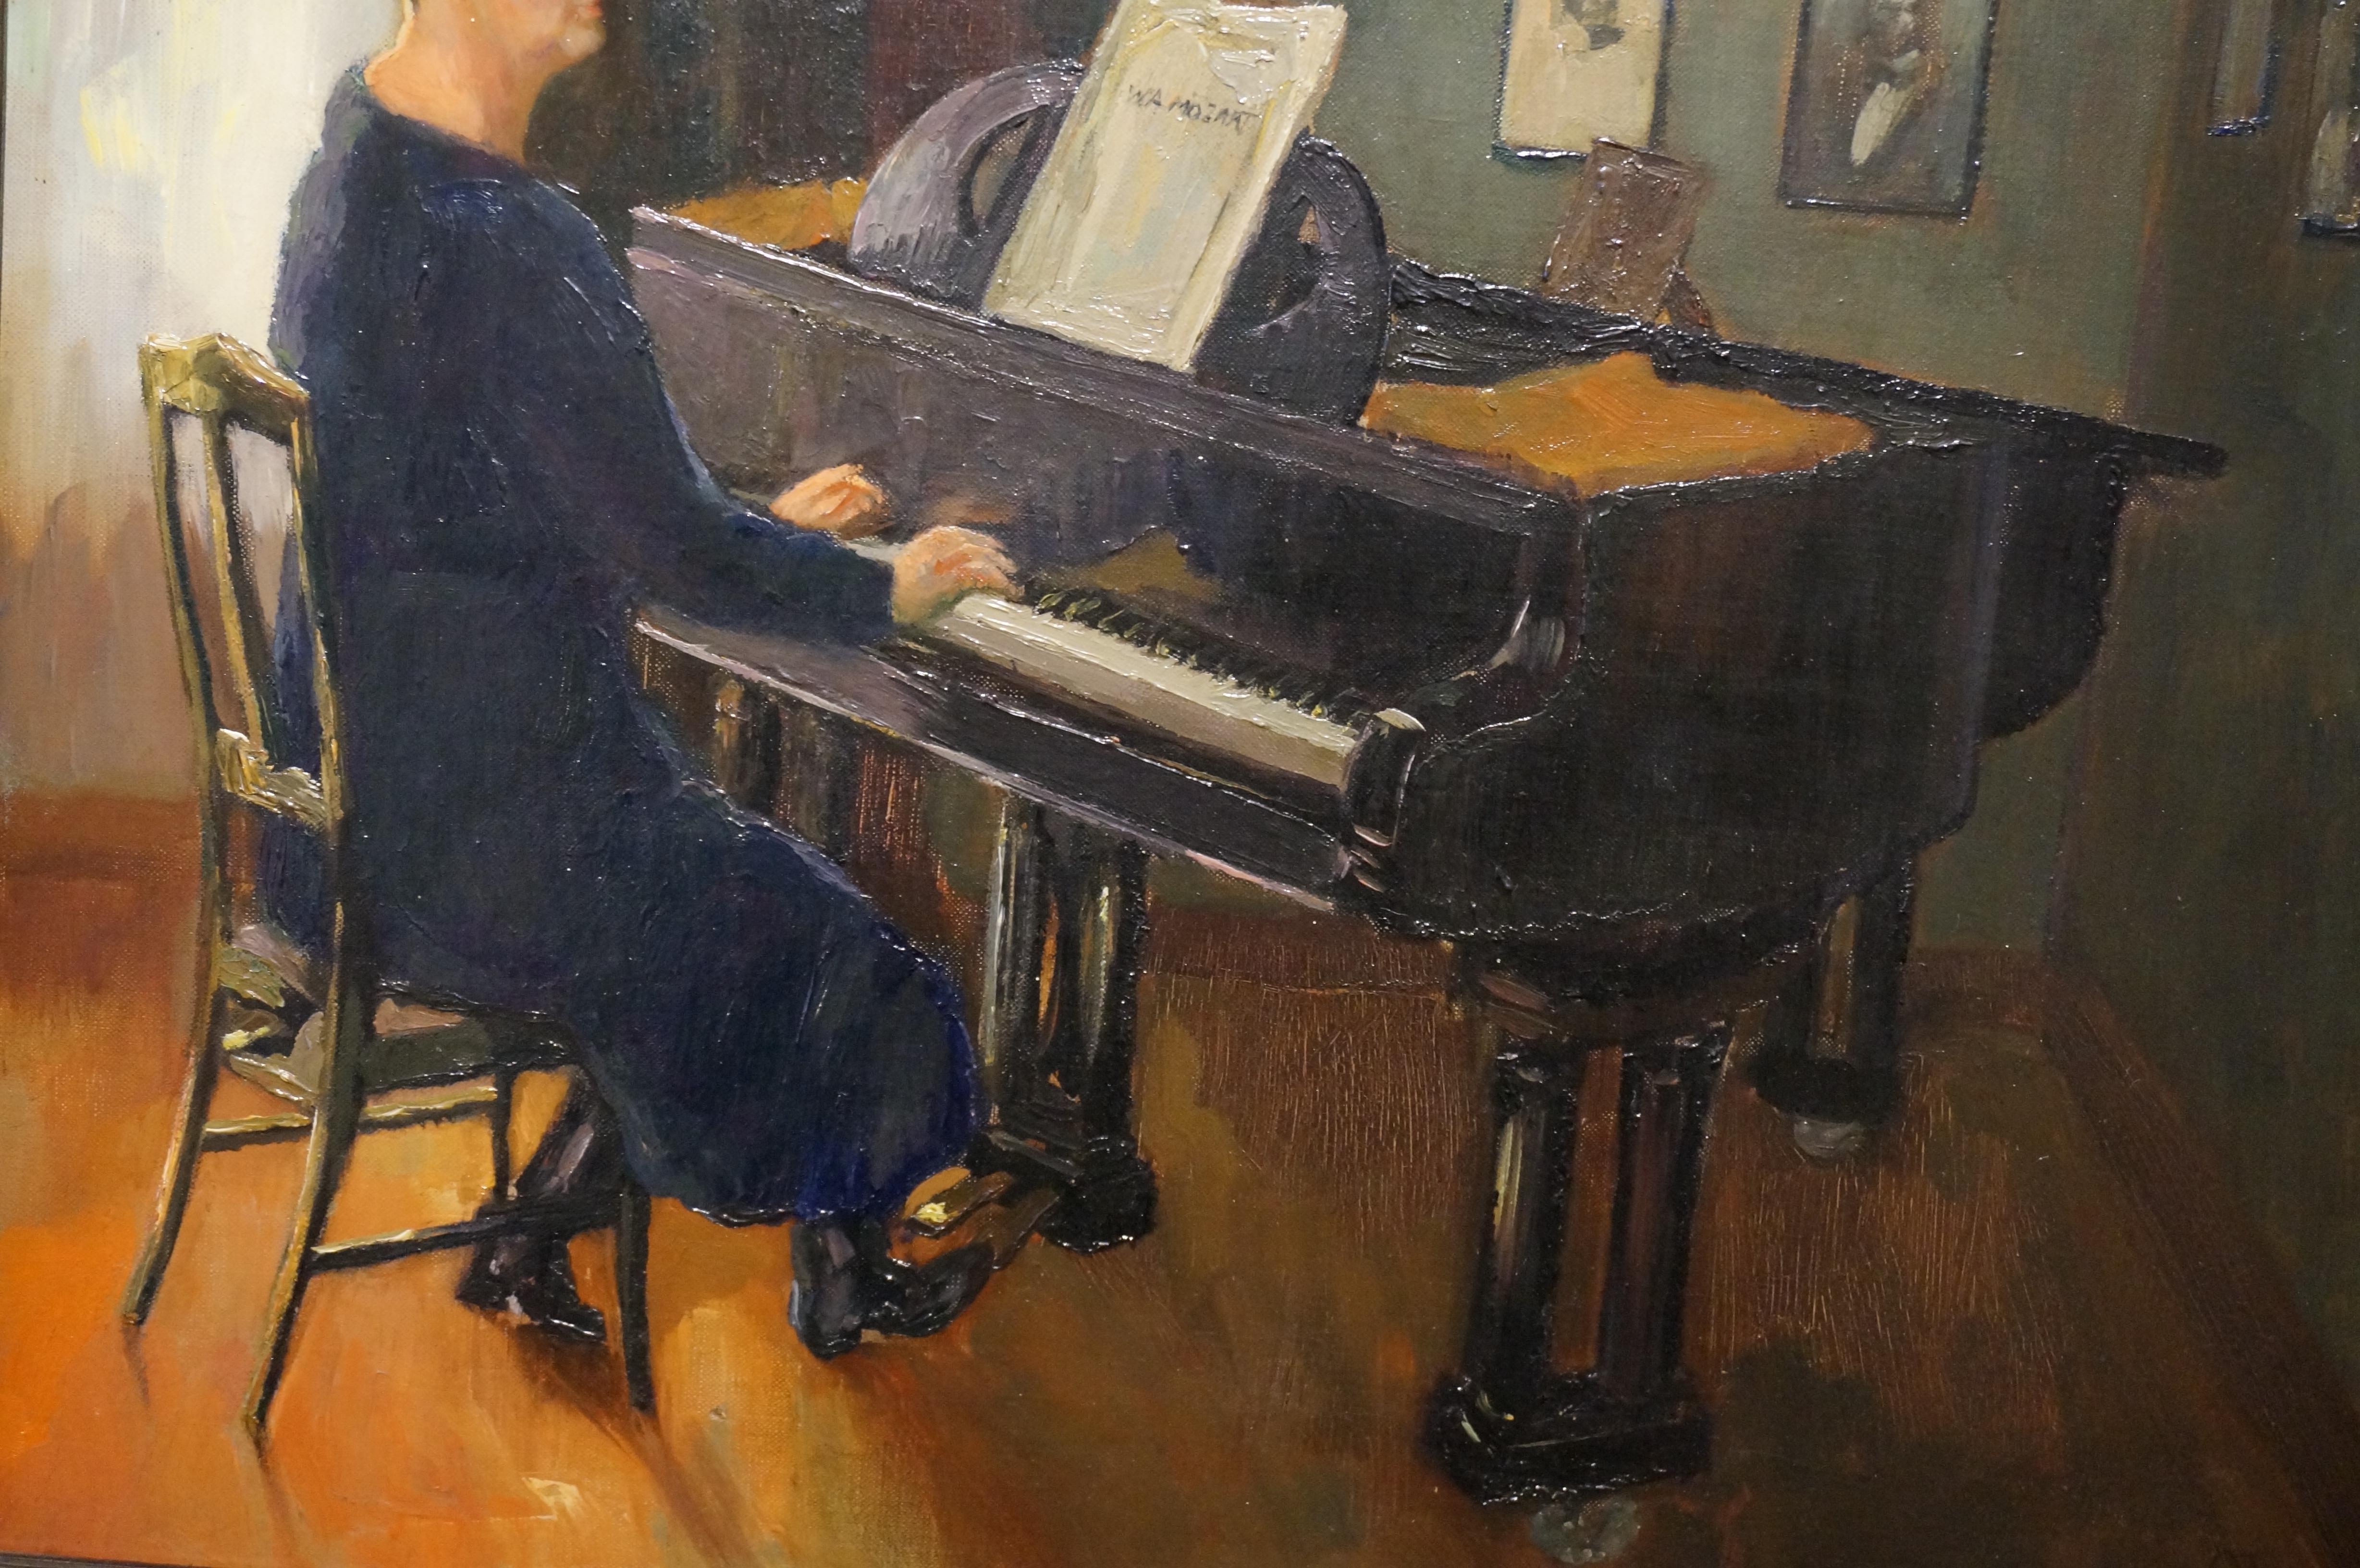 Decorative antique oil painting on canvas depicting a lady playing the piano in an interior 
Signed lower right Ft. B vd M
Oil on canvas
Dimensions excl. frame: approx. 51 x 48 cm.

Some damage to the frame
